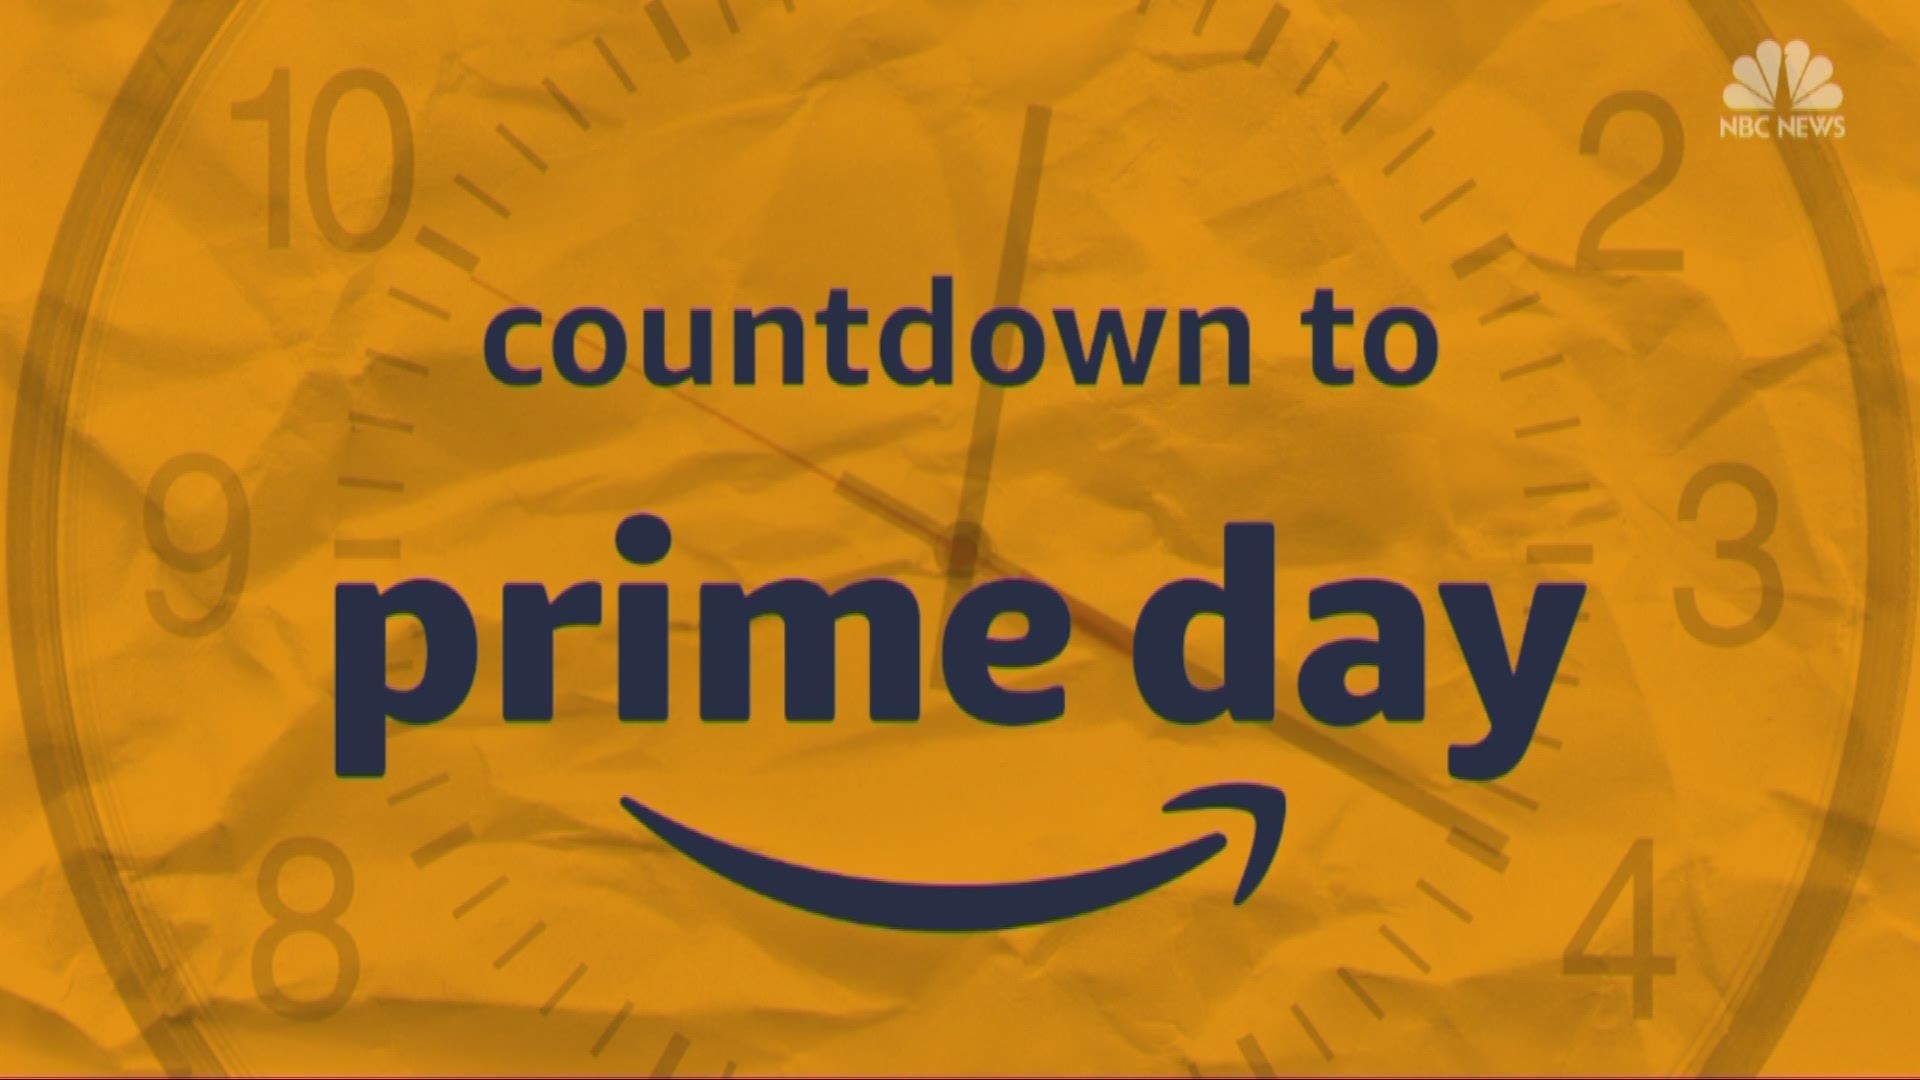 Amazon is rolling out thousands of deals over the next 36 hours as part of its annual "Prime Day" sale.